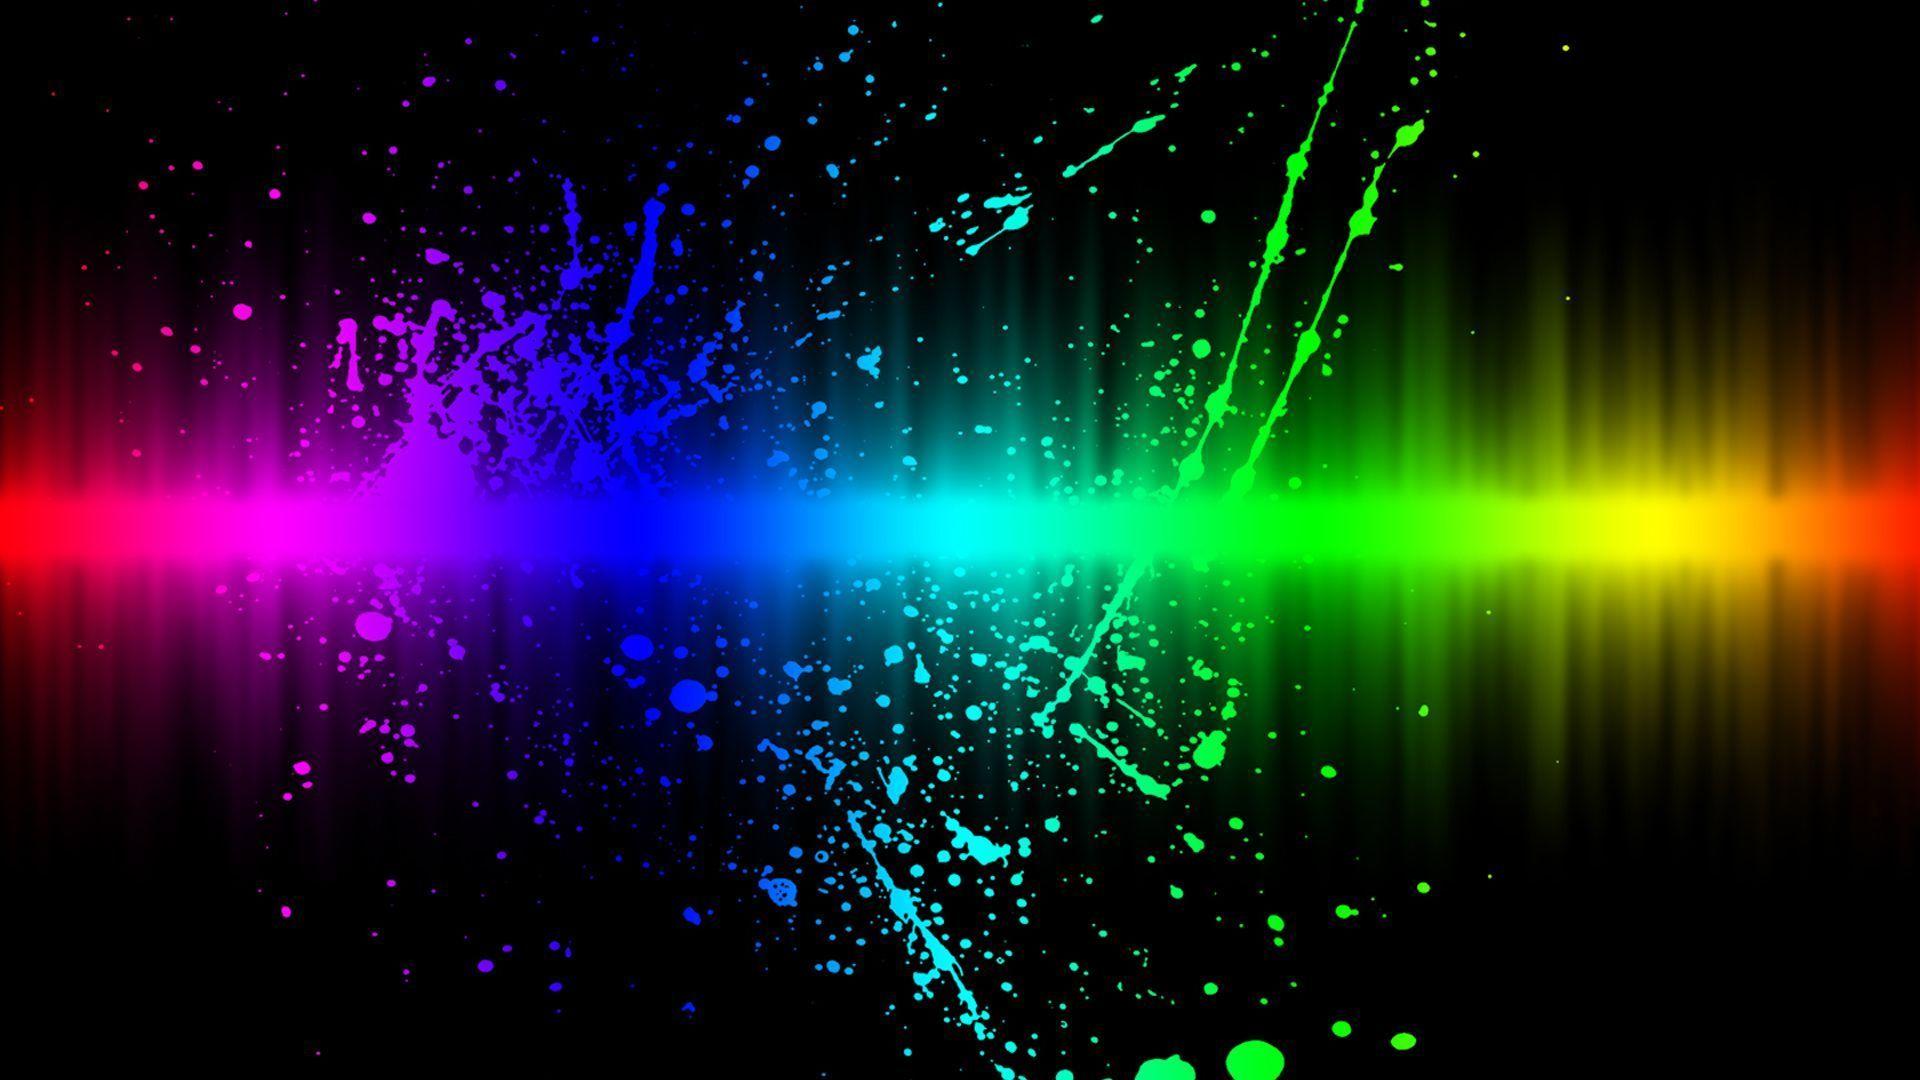 Colorful Background HD Image Wallpaper